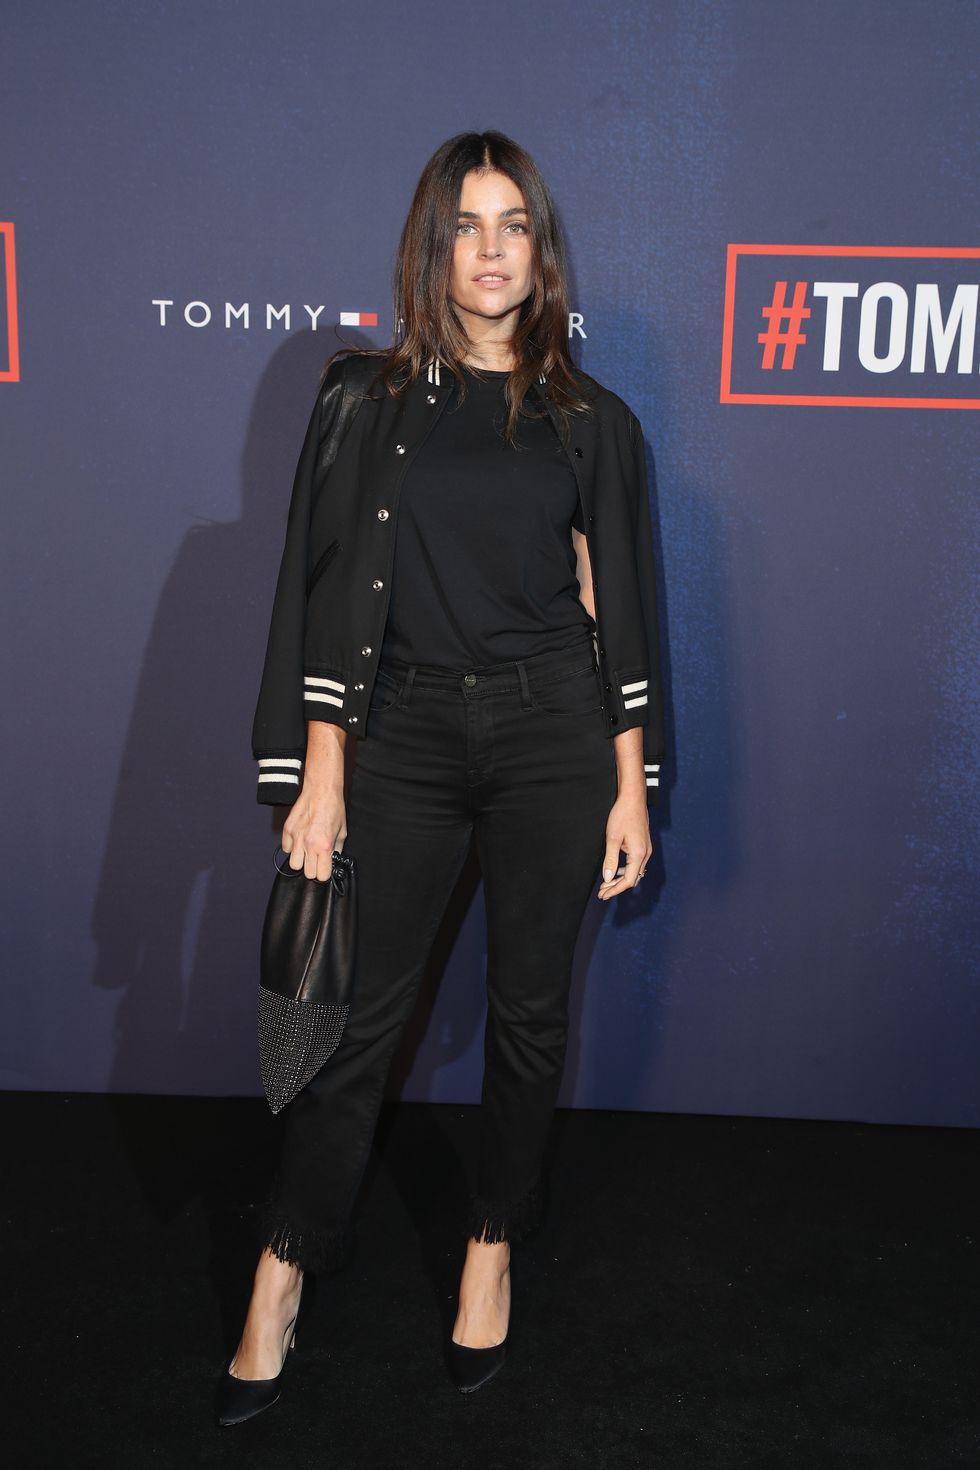 LONDON, ENGLAND - SEPTEMBER 19:  Julia Roitfeld attends the Tommy Hilfiger TOMMYNOW Fall 2017 Show during London Fashion Week September 2017 at the Roundhouse on September 19, 2017 in London, England.  (Photo by Mike Marsland/Getty Images for Tommy Hilfiger)